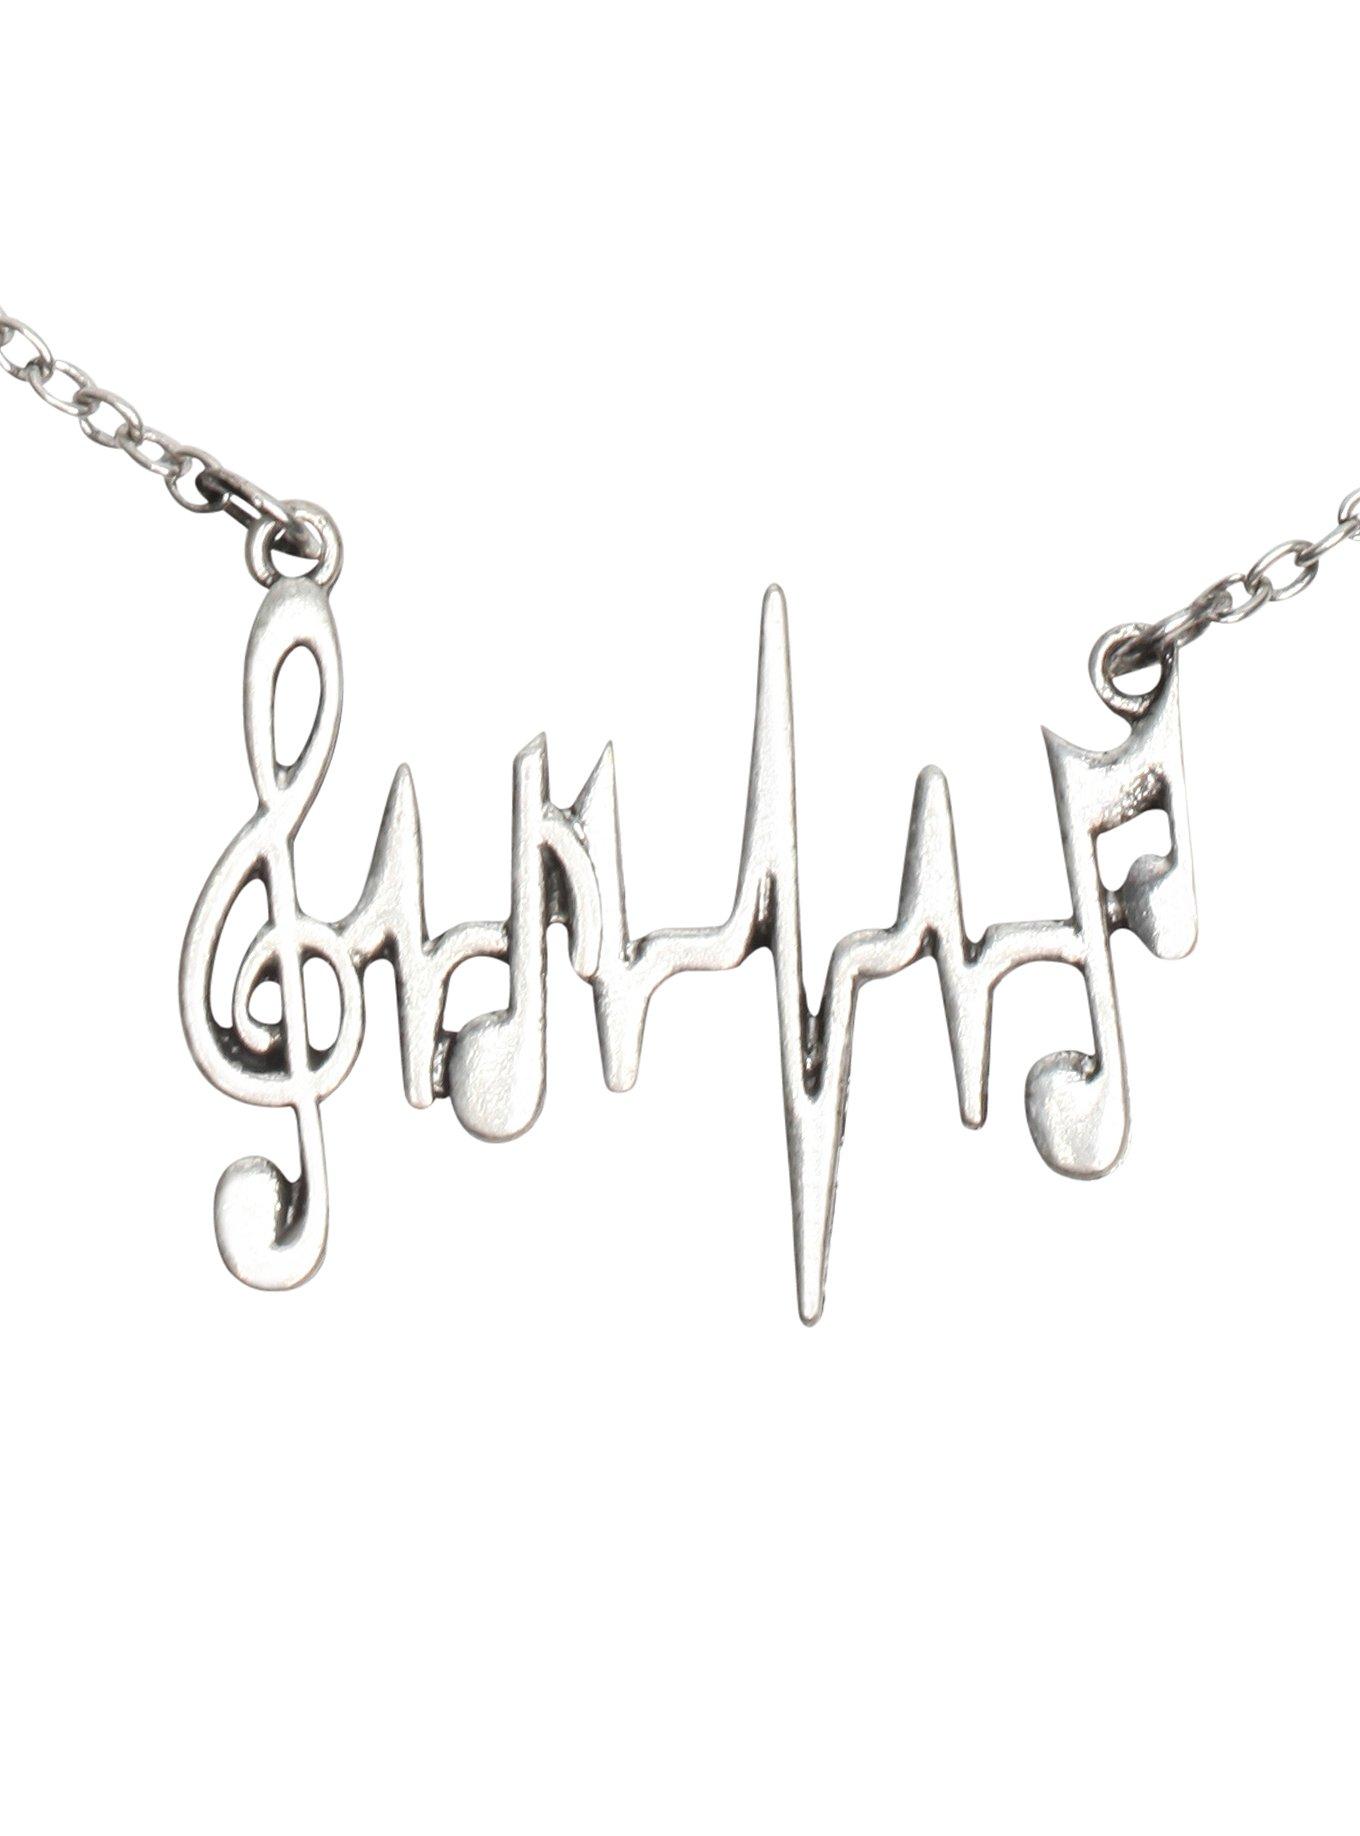 Heartbeat Music Note Necklace, , hi-res